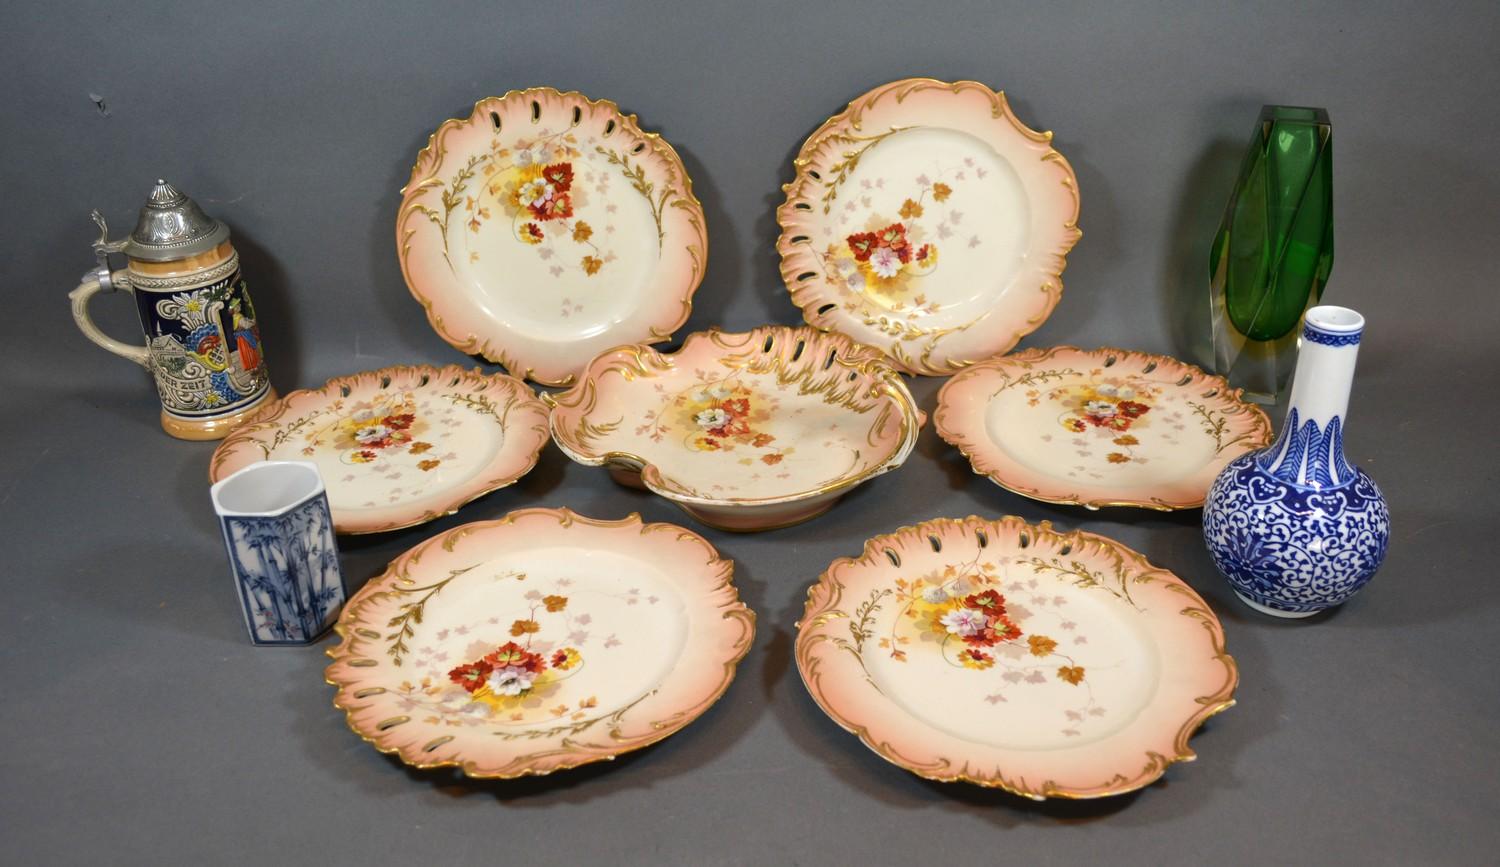 A Limoges Porcelain Dessert Service together with various other ceramics and glassware